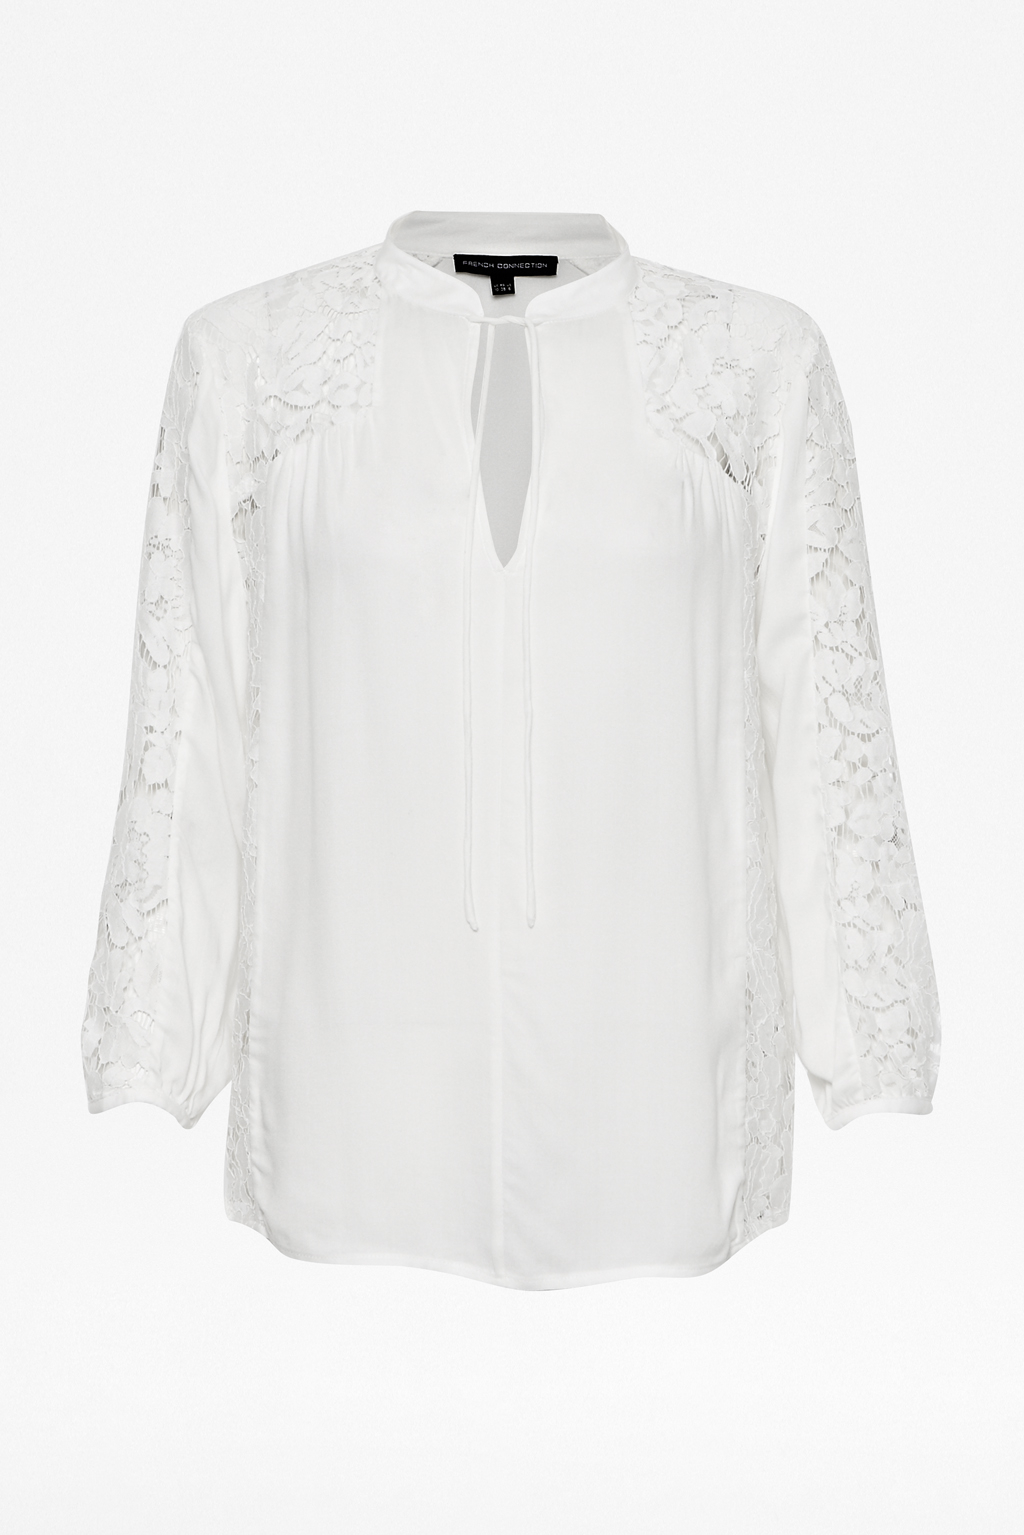 Lyst - French connection Fluid Crepe Lace Panel Shirt in White